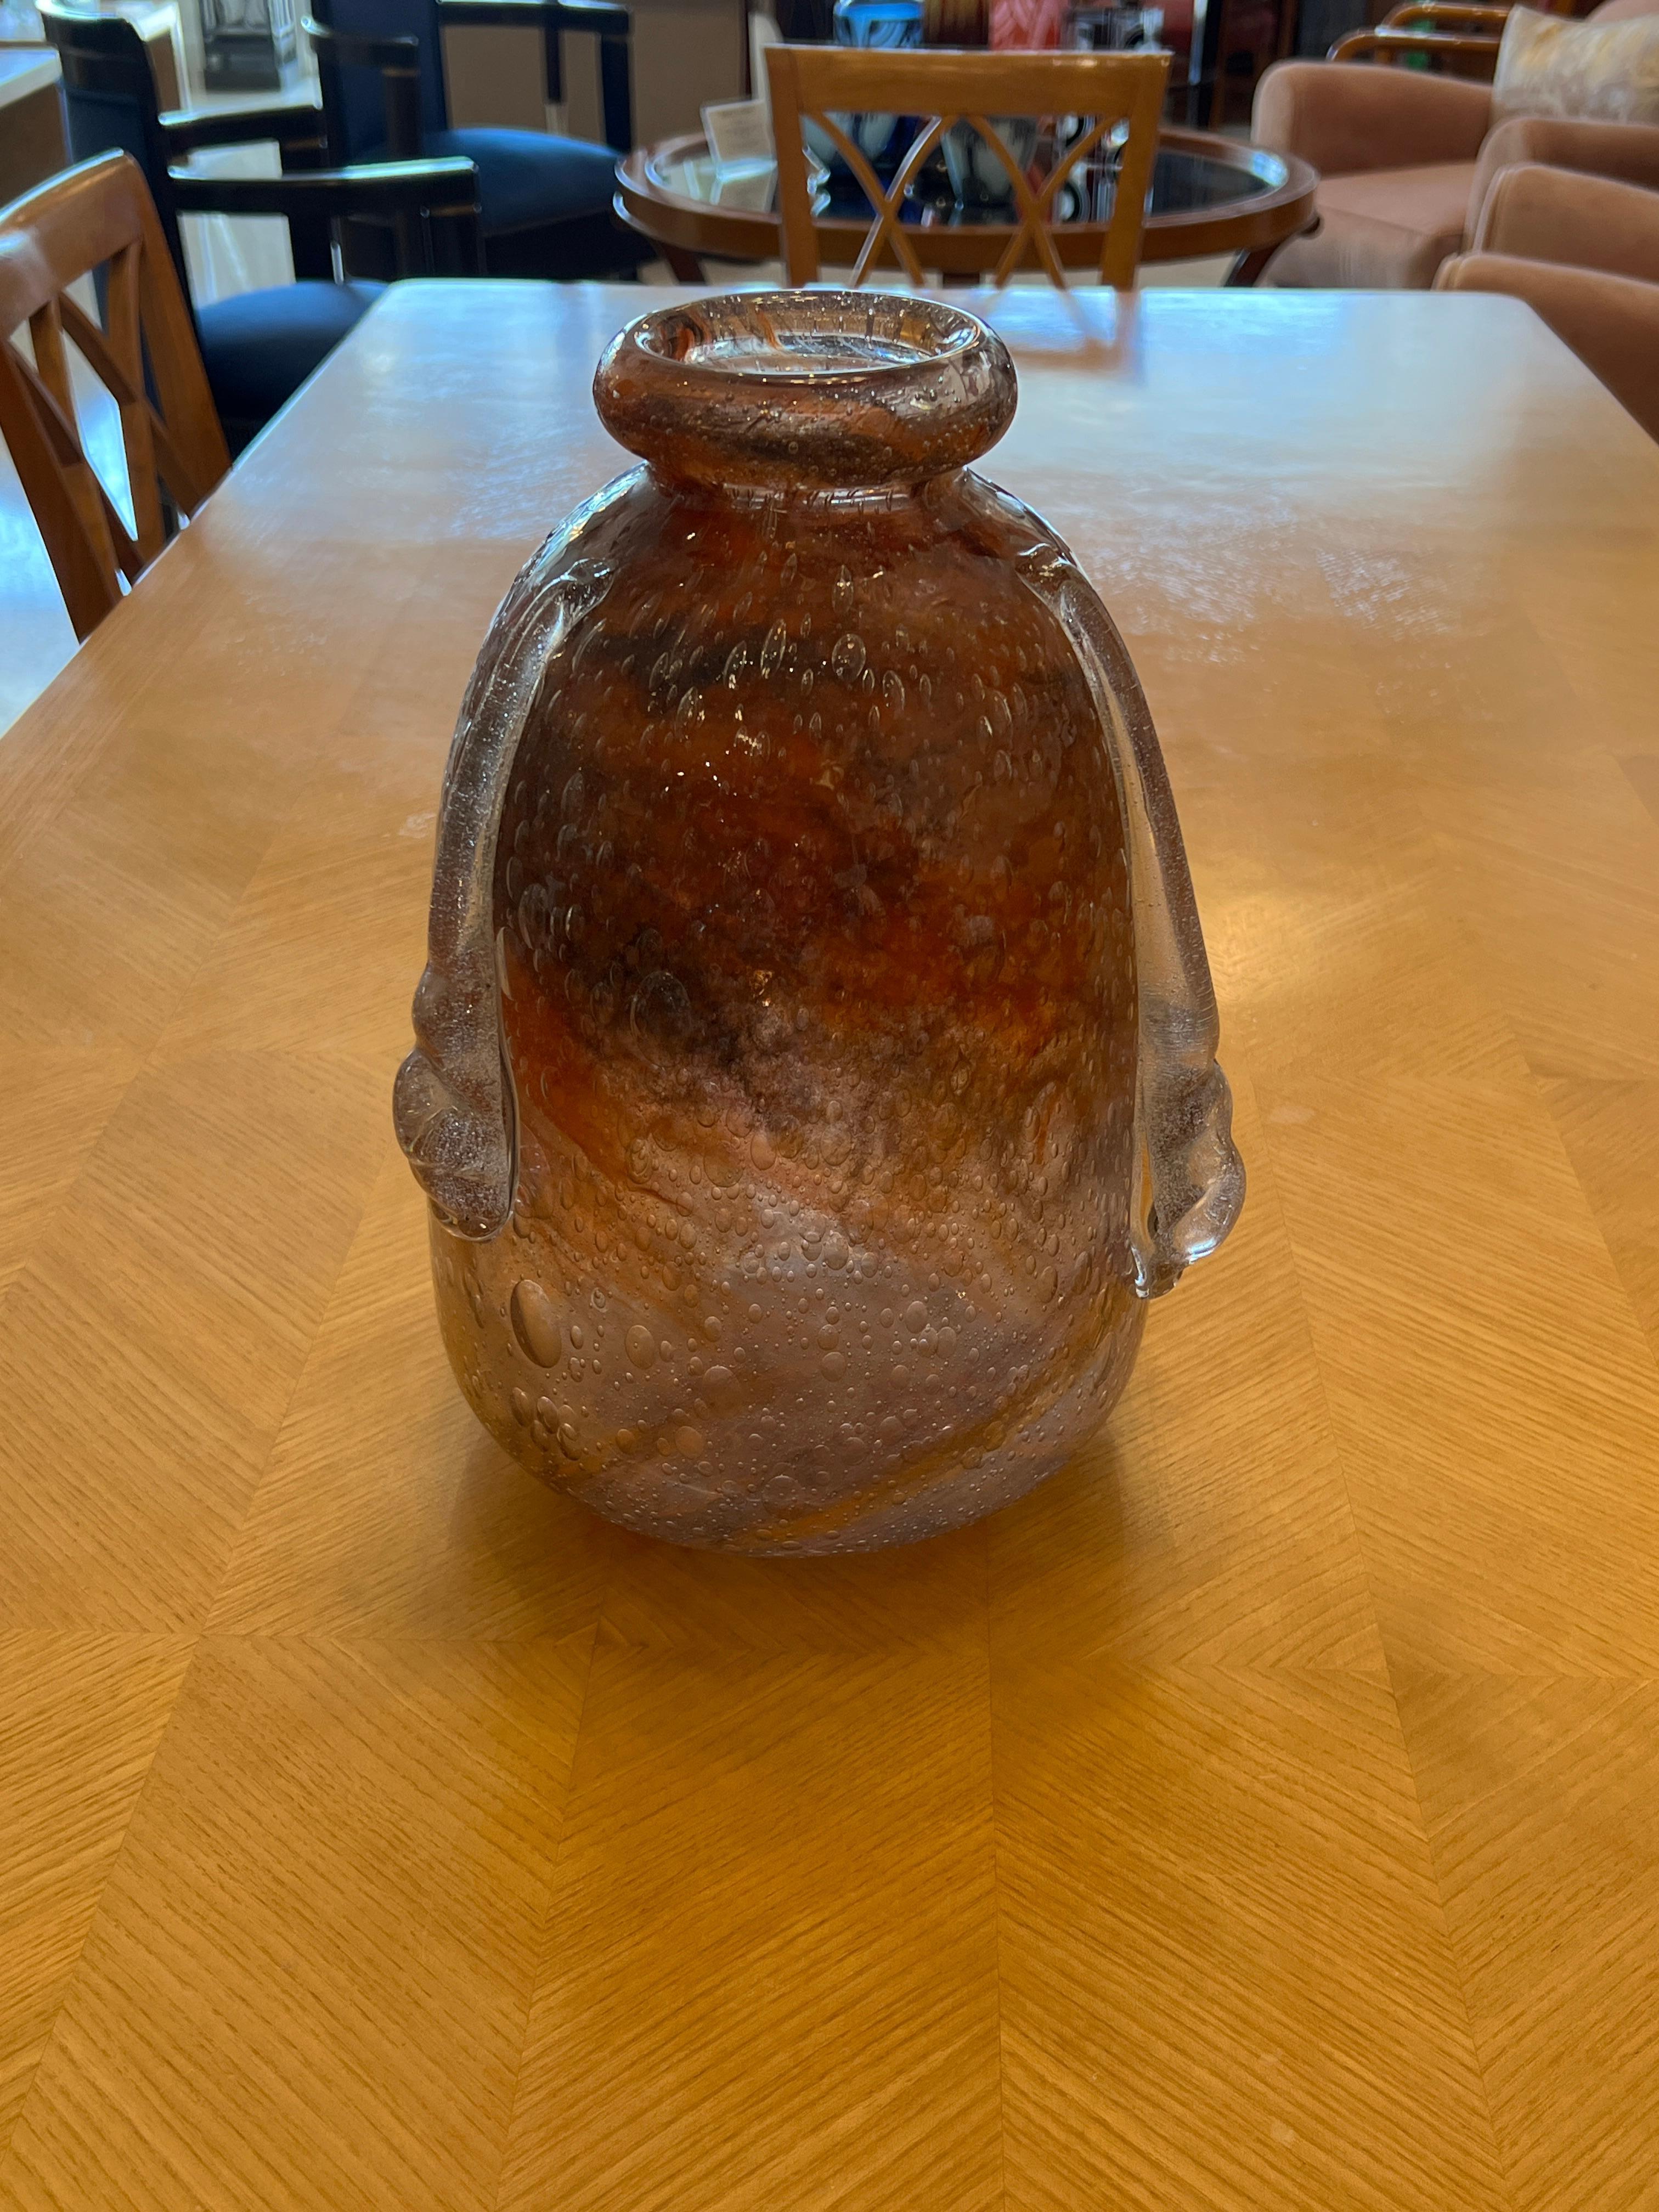 A Blown Glass Vase in hues of Burnt Orange with drops of clear glass details.  This vase is signed By Charles Schneider
Charles Schneider was a renowned glassmaker during the Art Deco period in France. He was known for his beautiful and intricate